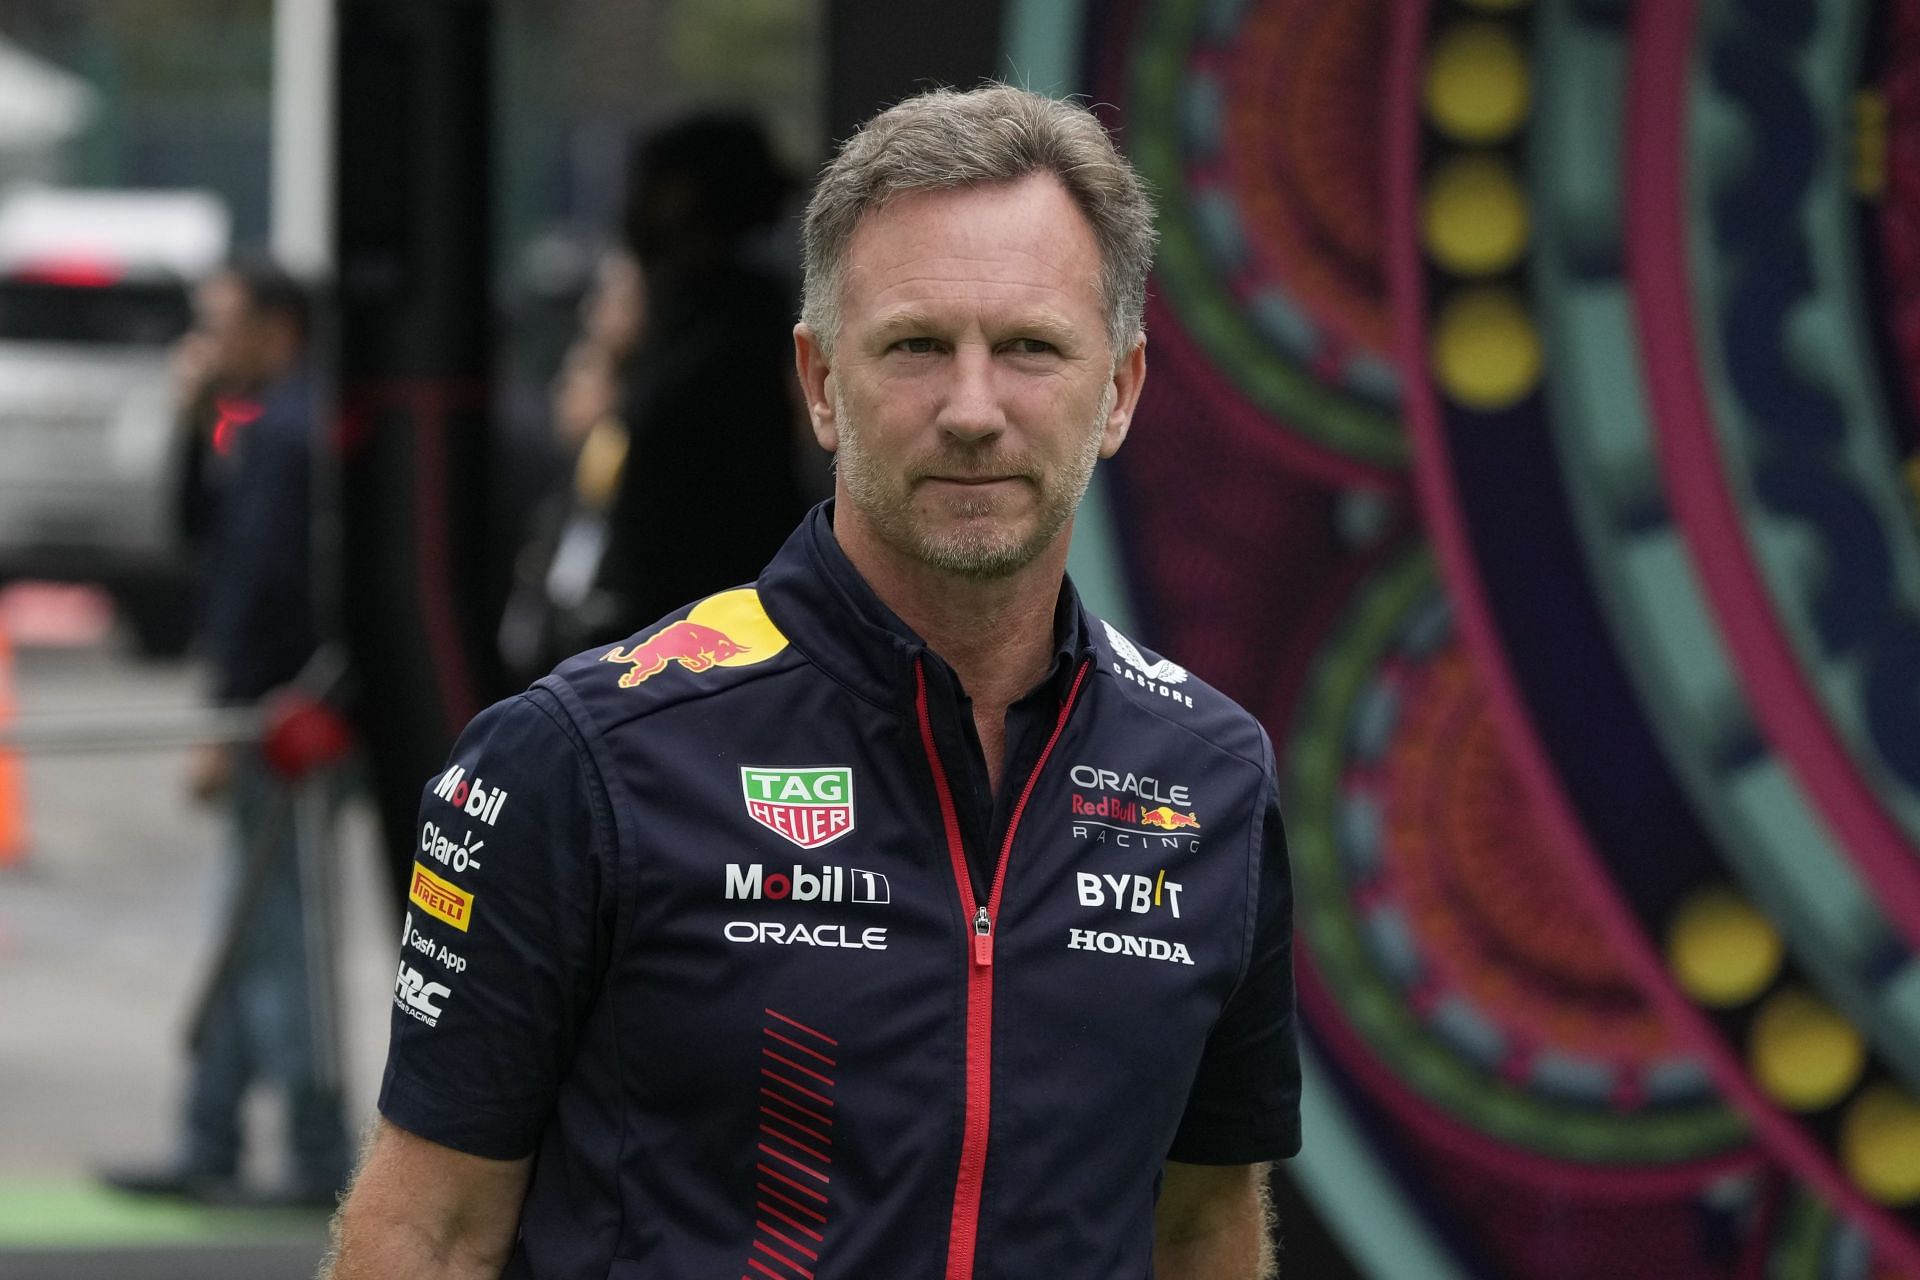 Red Bull team boss shares hilarious story of being dumped by girlfriend ...